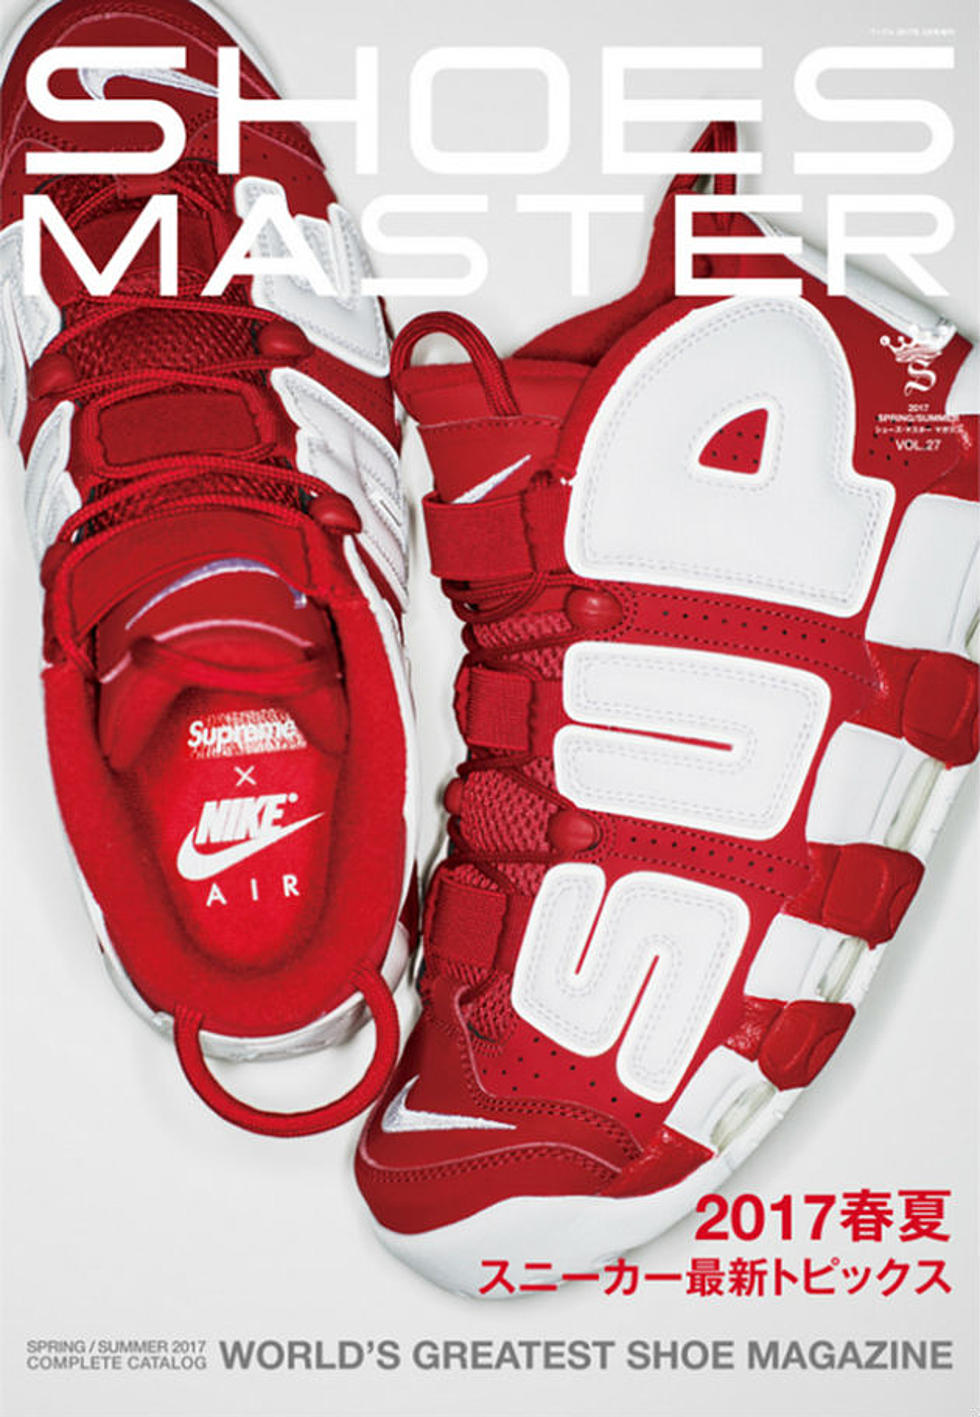 Check Out the Unreleased Nike and Supreme’s Red Suptempo 